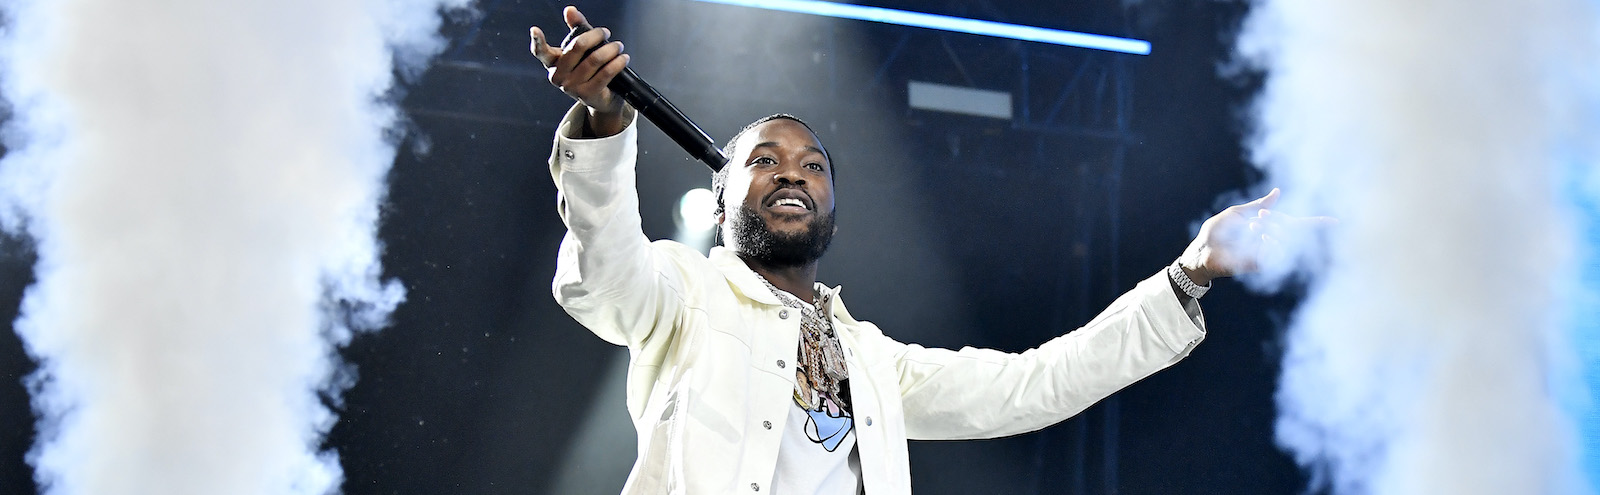 Meek Mill Celebrates Buying His Grandmother A New House - blessed up meek mill roblox code